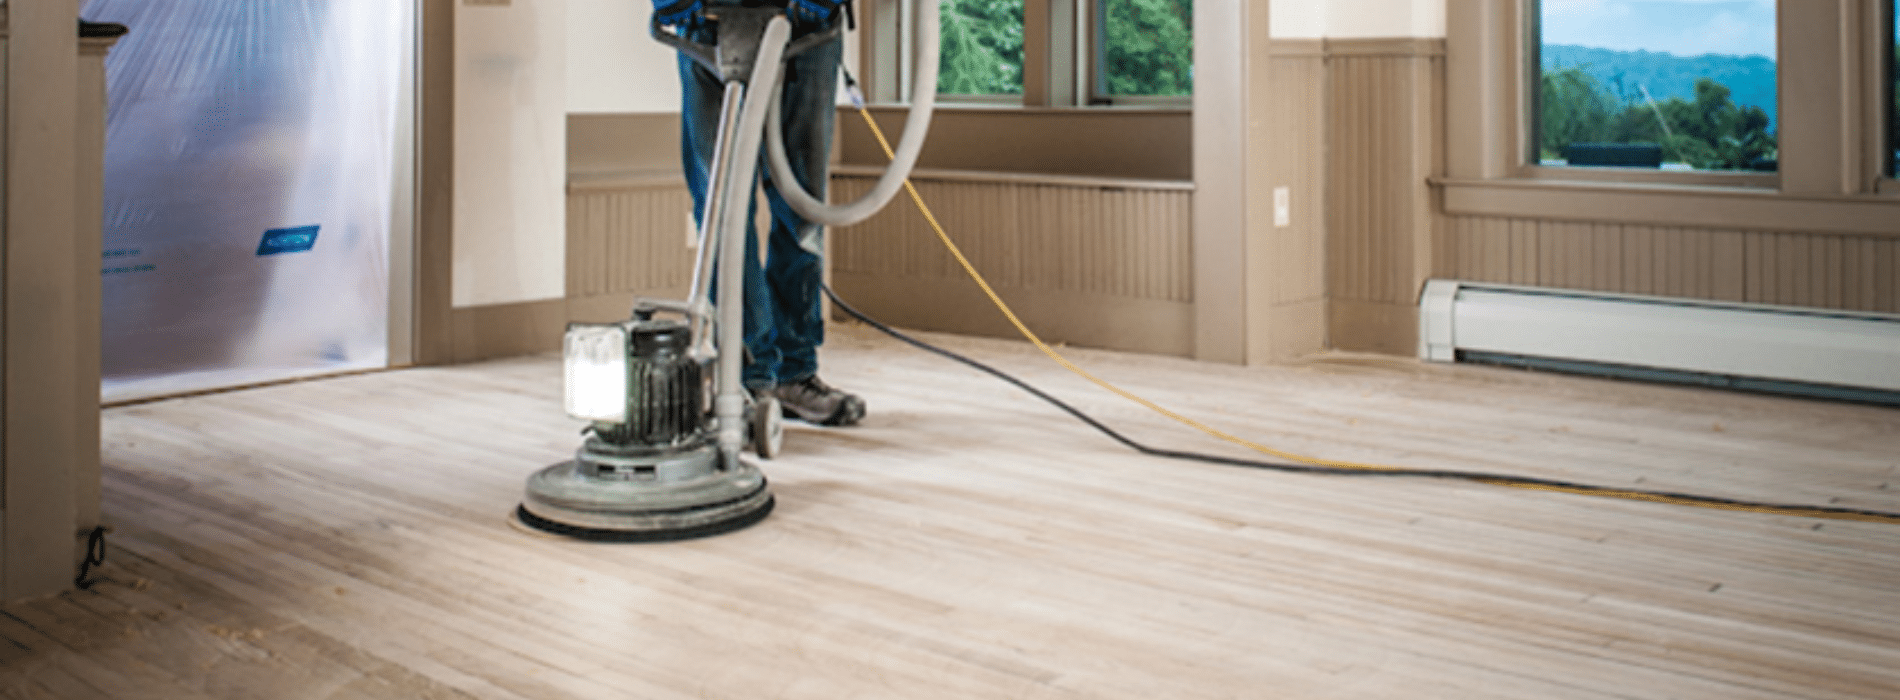 Mr Sander® in action, using a 2.2kW, 230V Bona buffer sander to restore a herringbone floor in Bow, E3. Their dust extraction system with HEPA filter ensures an efficient, clean process, leading to immaculate, rejuvenated wooden floors.